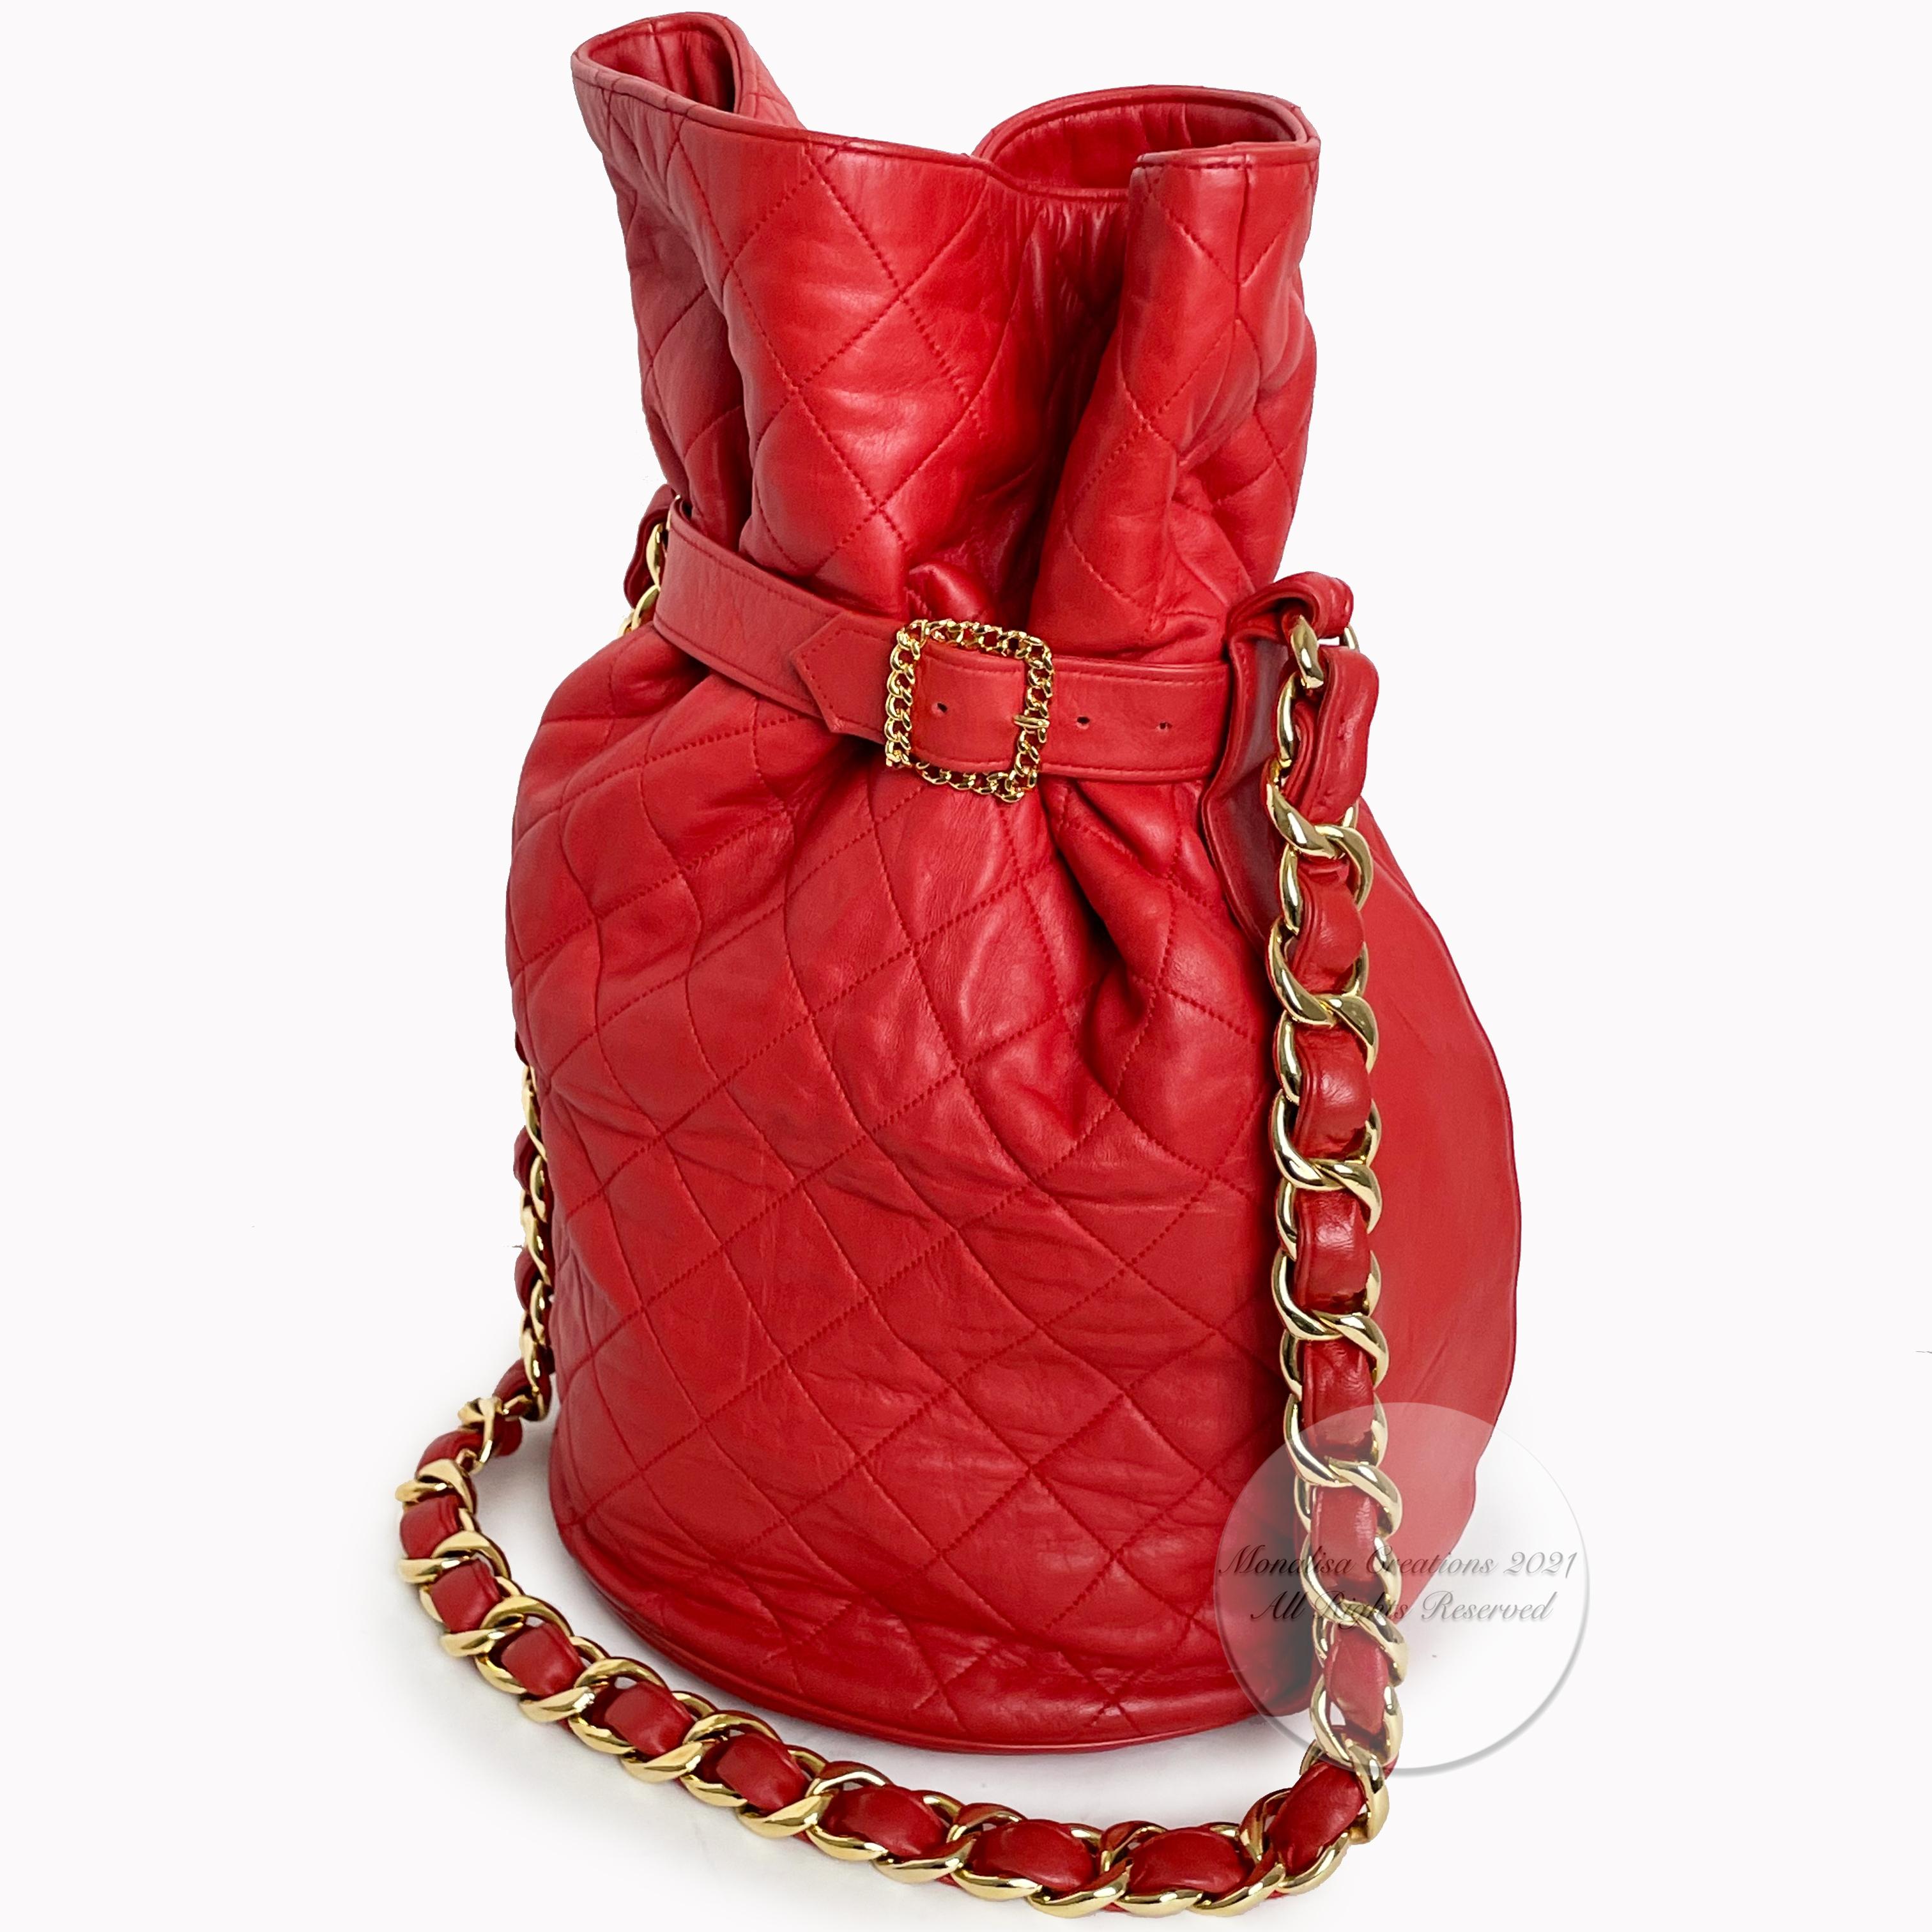 Vintage Chanel Buckle Bag Red Matelasse Leather with Chain Strap F/W 1992 Rare 3